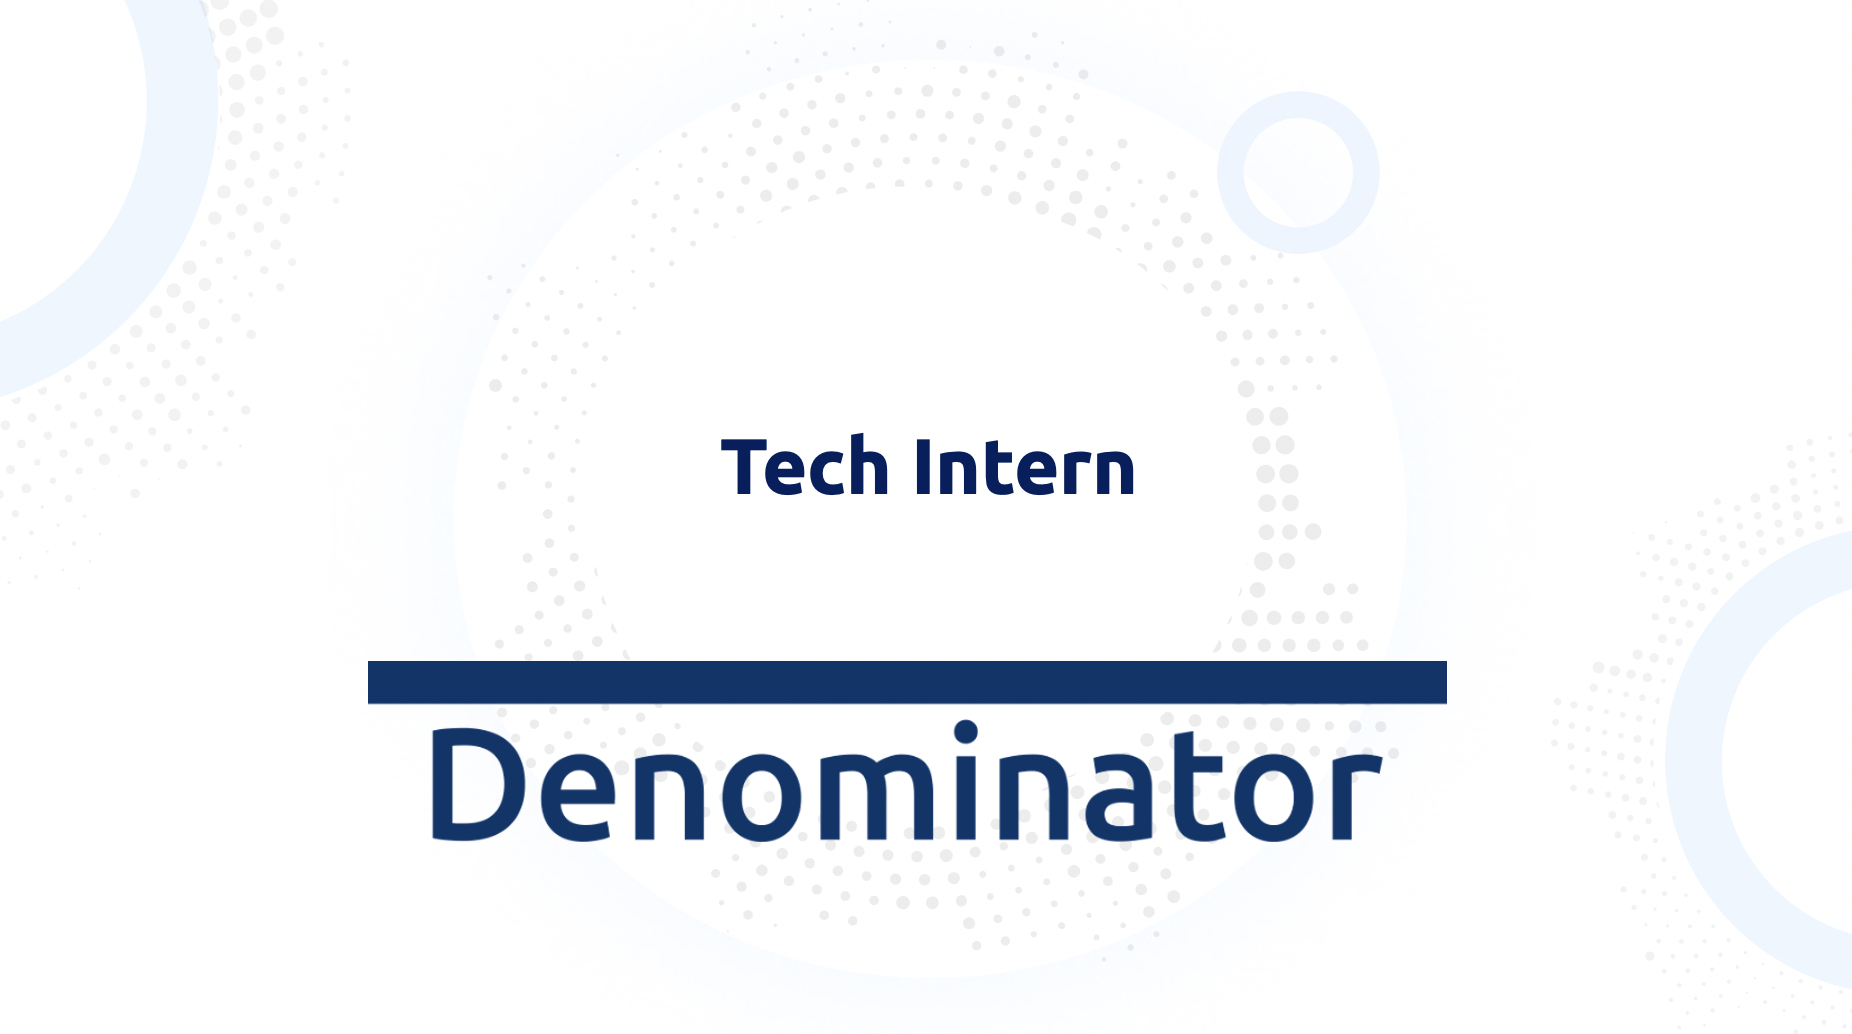 Denominator is looking for a Tech Intern (full time, remotely)